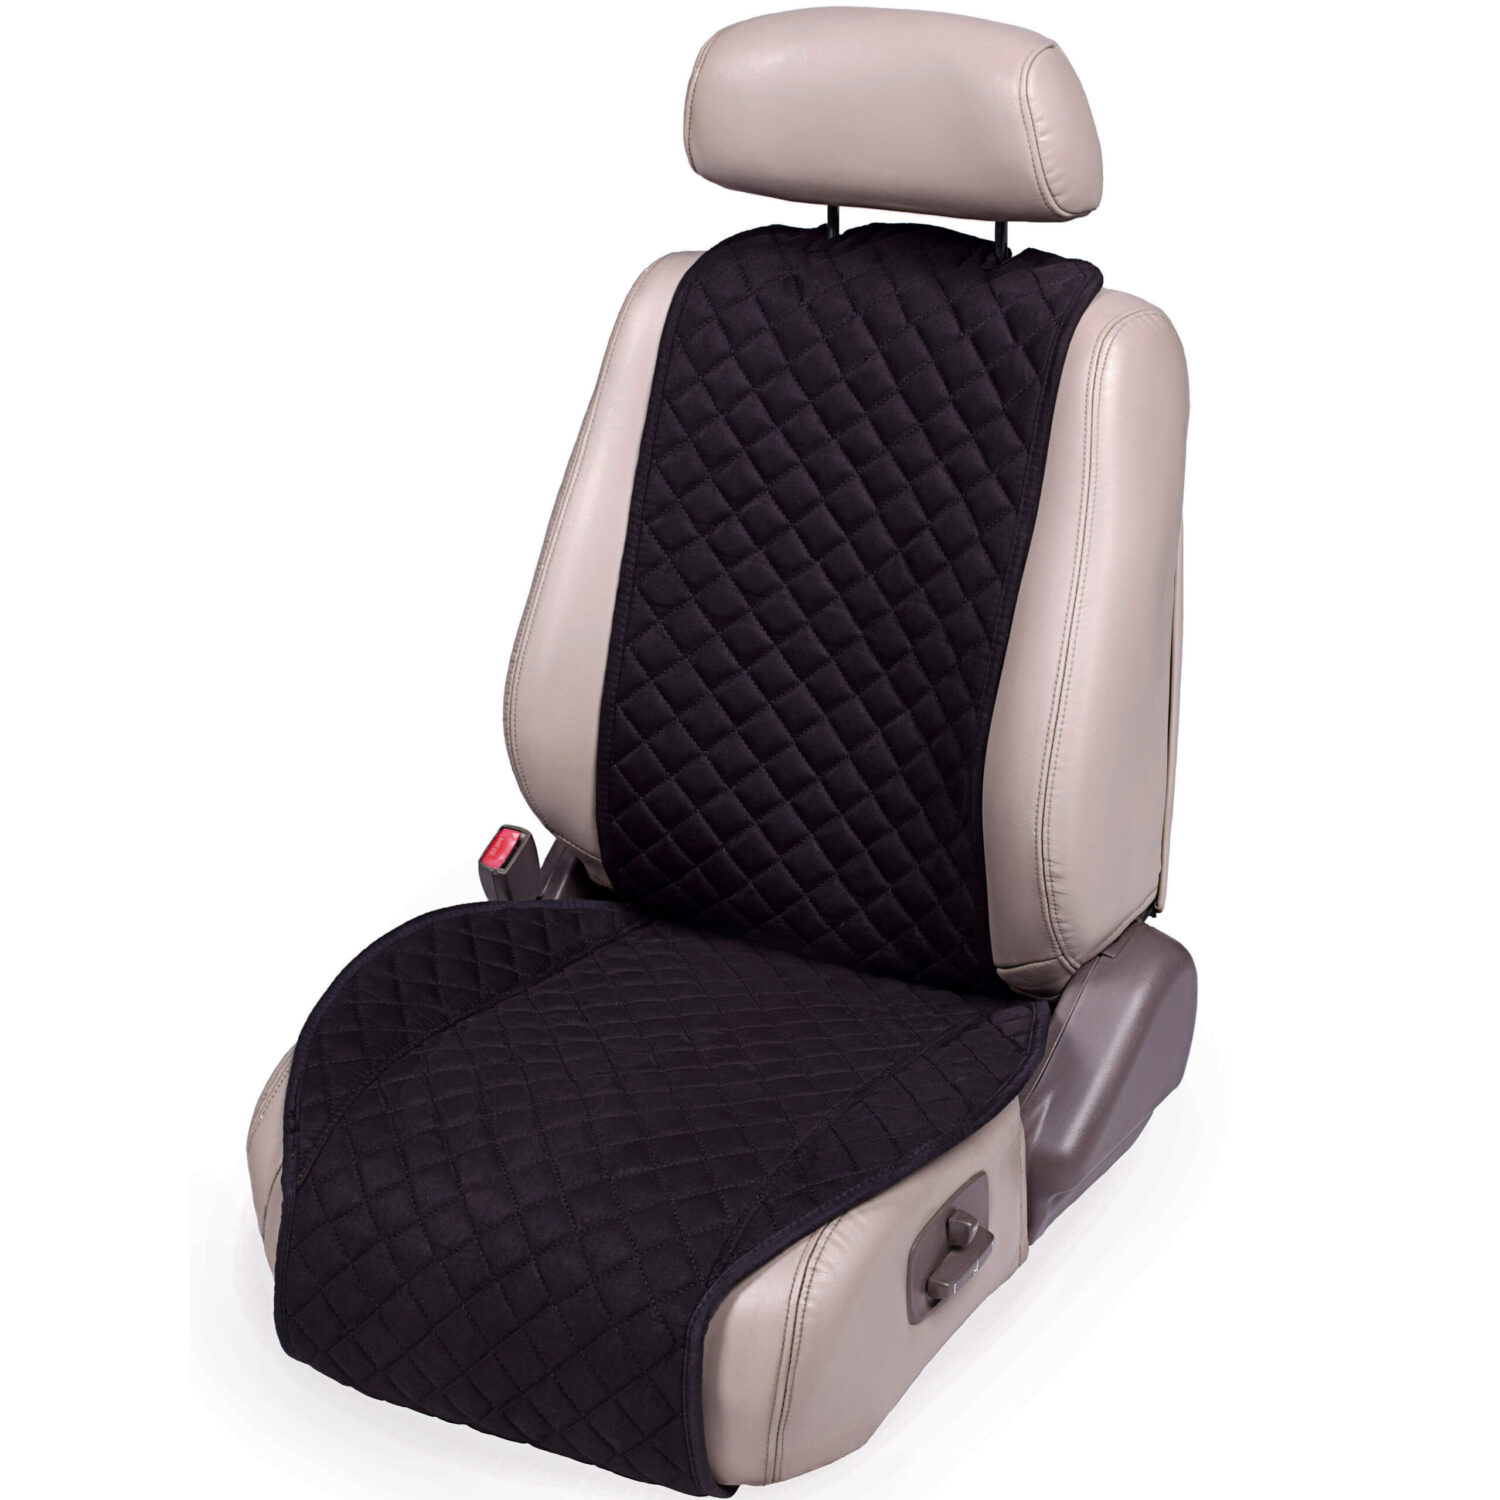 https://www.momjunction.com/wp-content/uploads/product-images/ivicy-linen-car-seat-cover_afl898.jpg